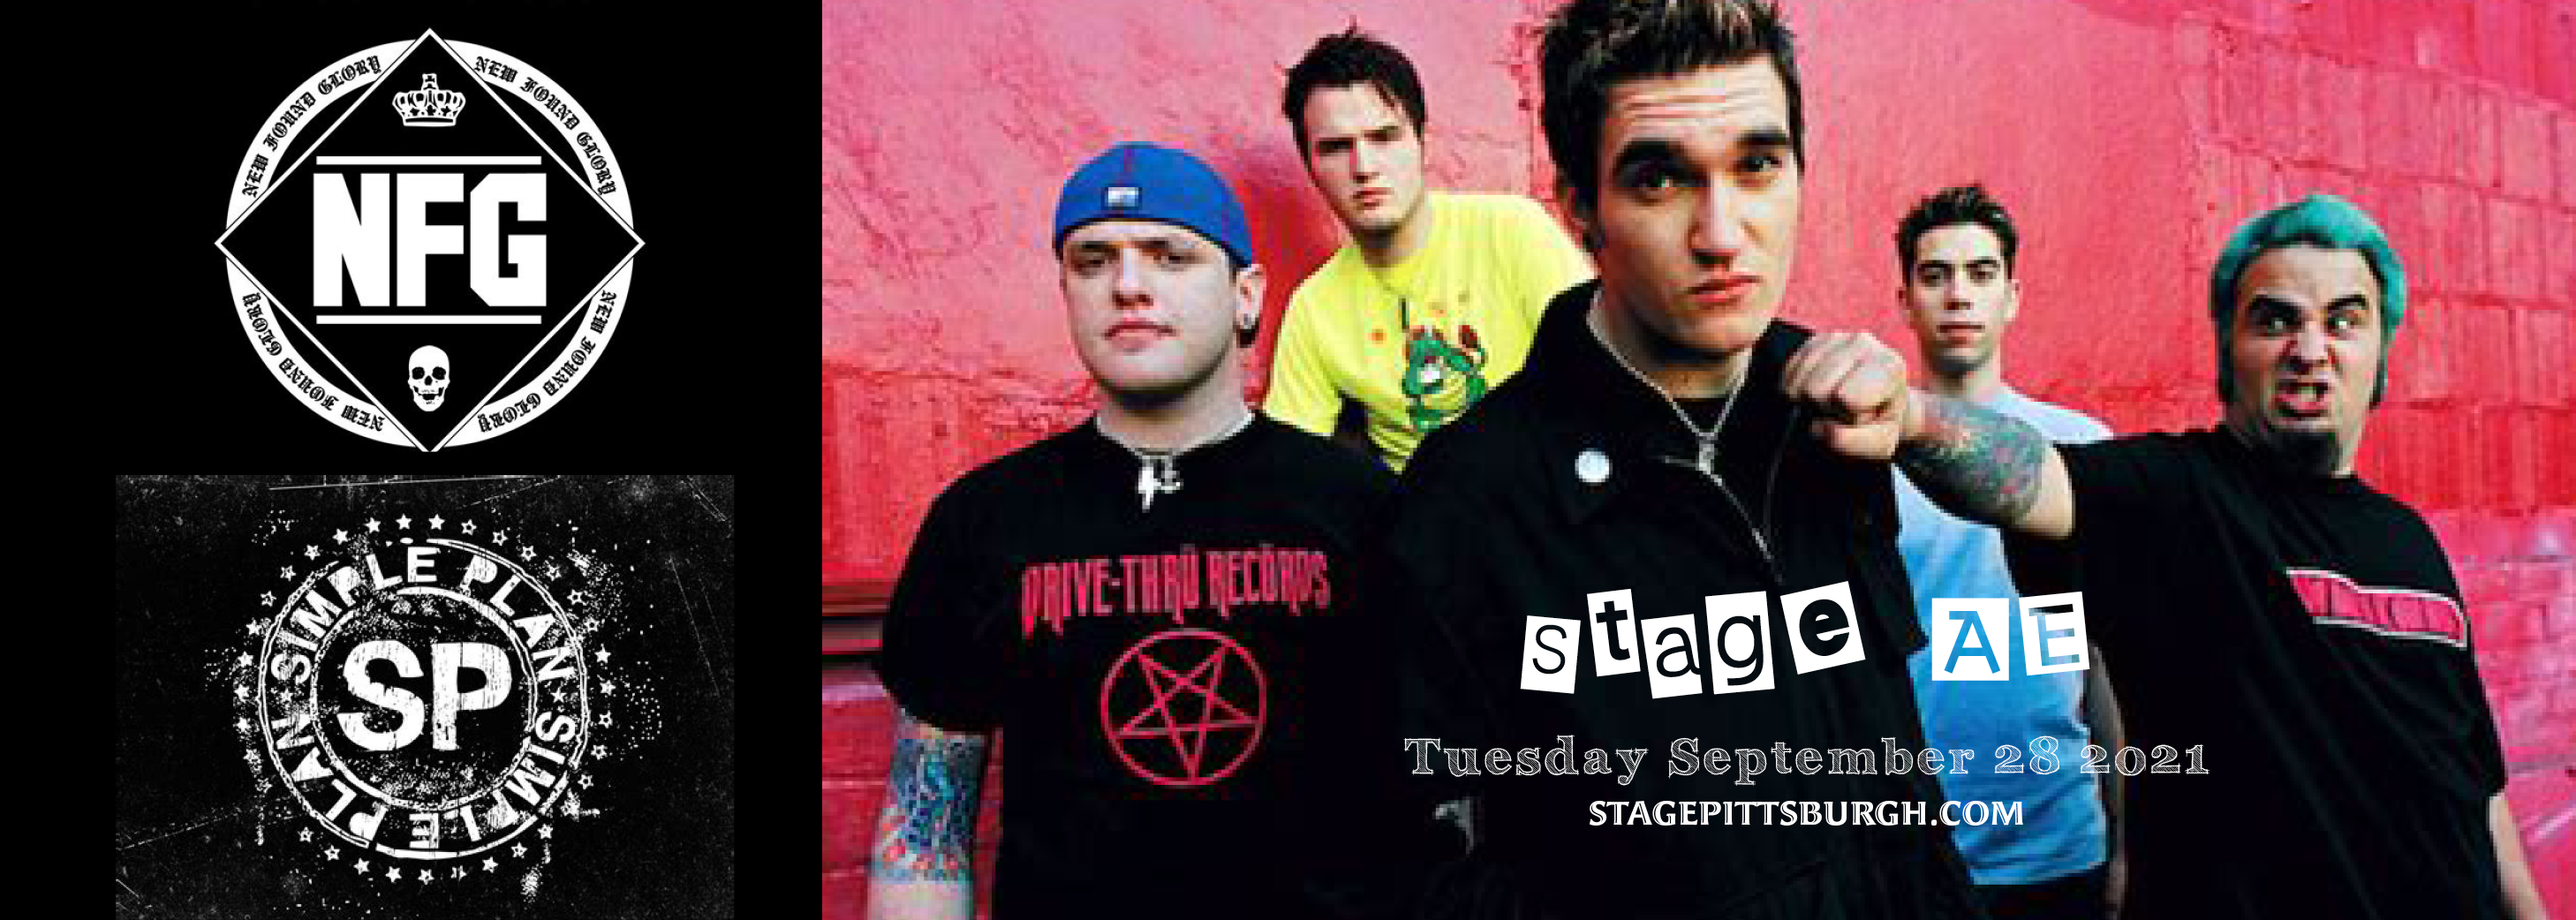 New Found Glory & Simple Plan at Stage AE